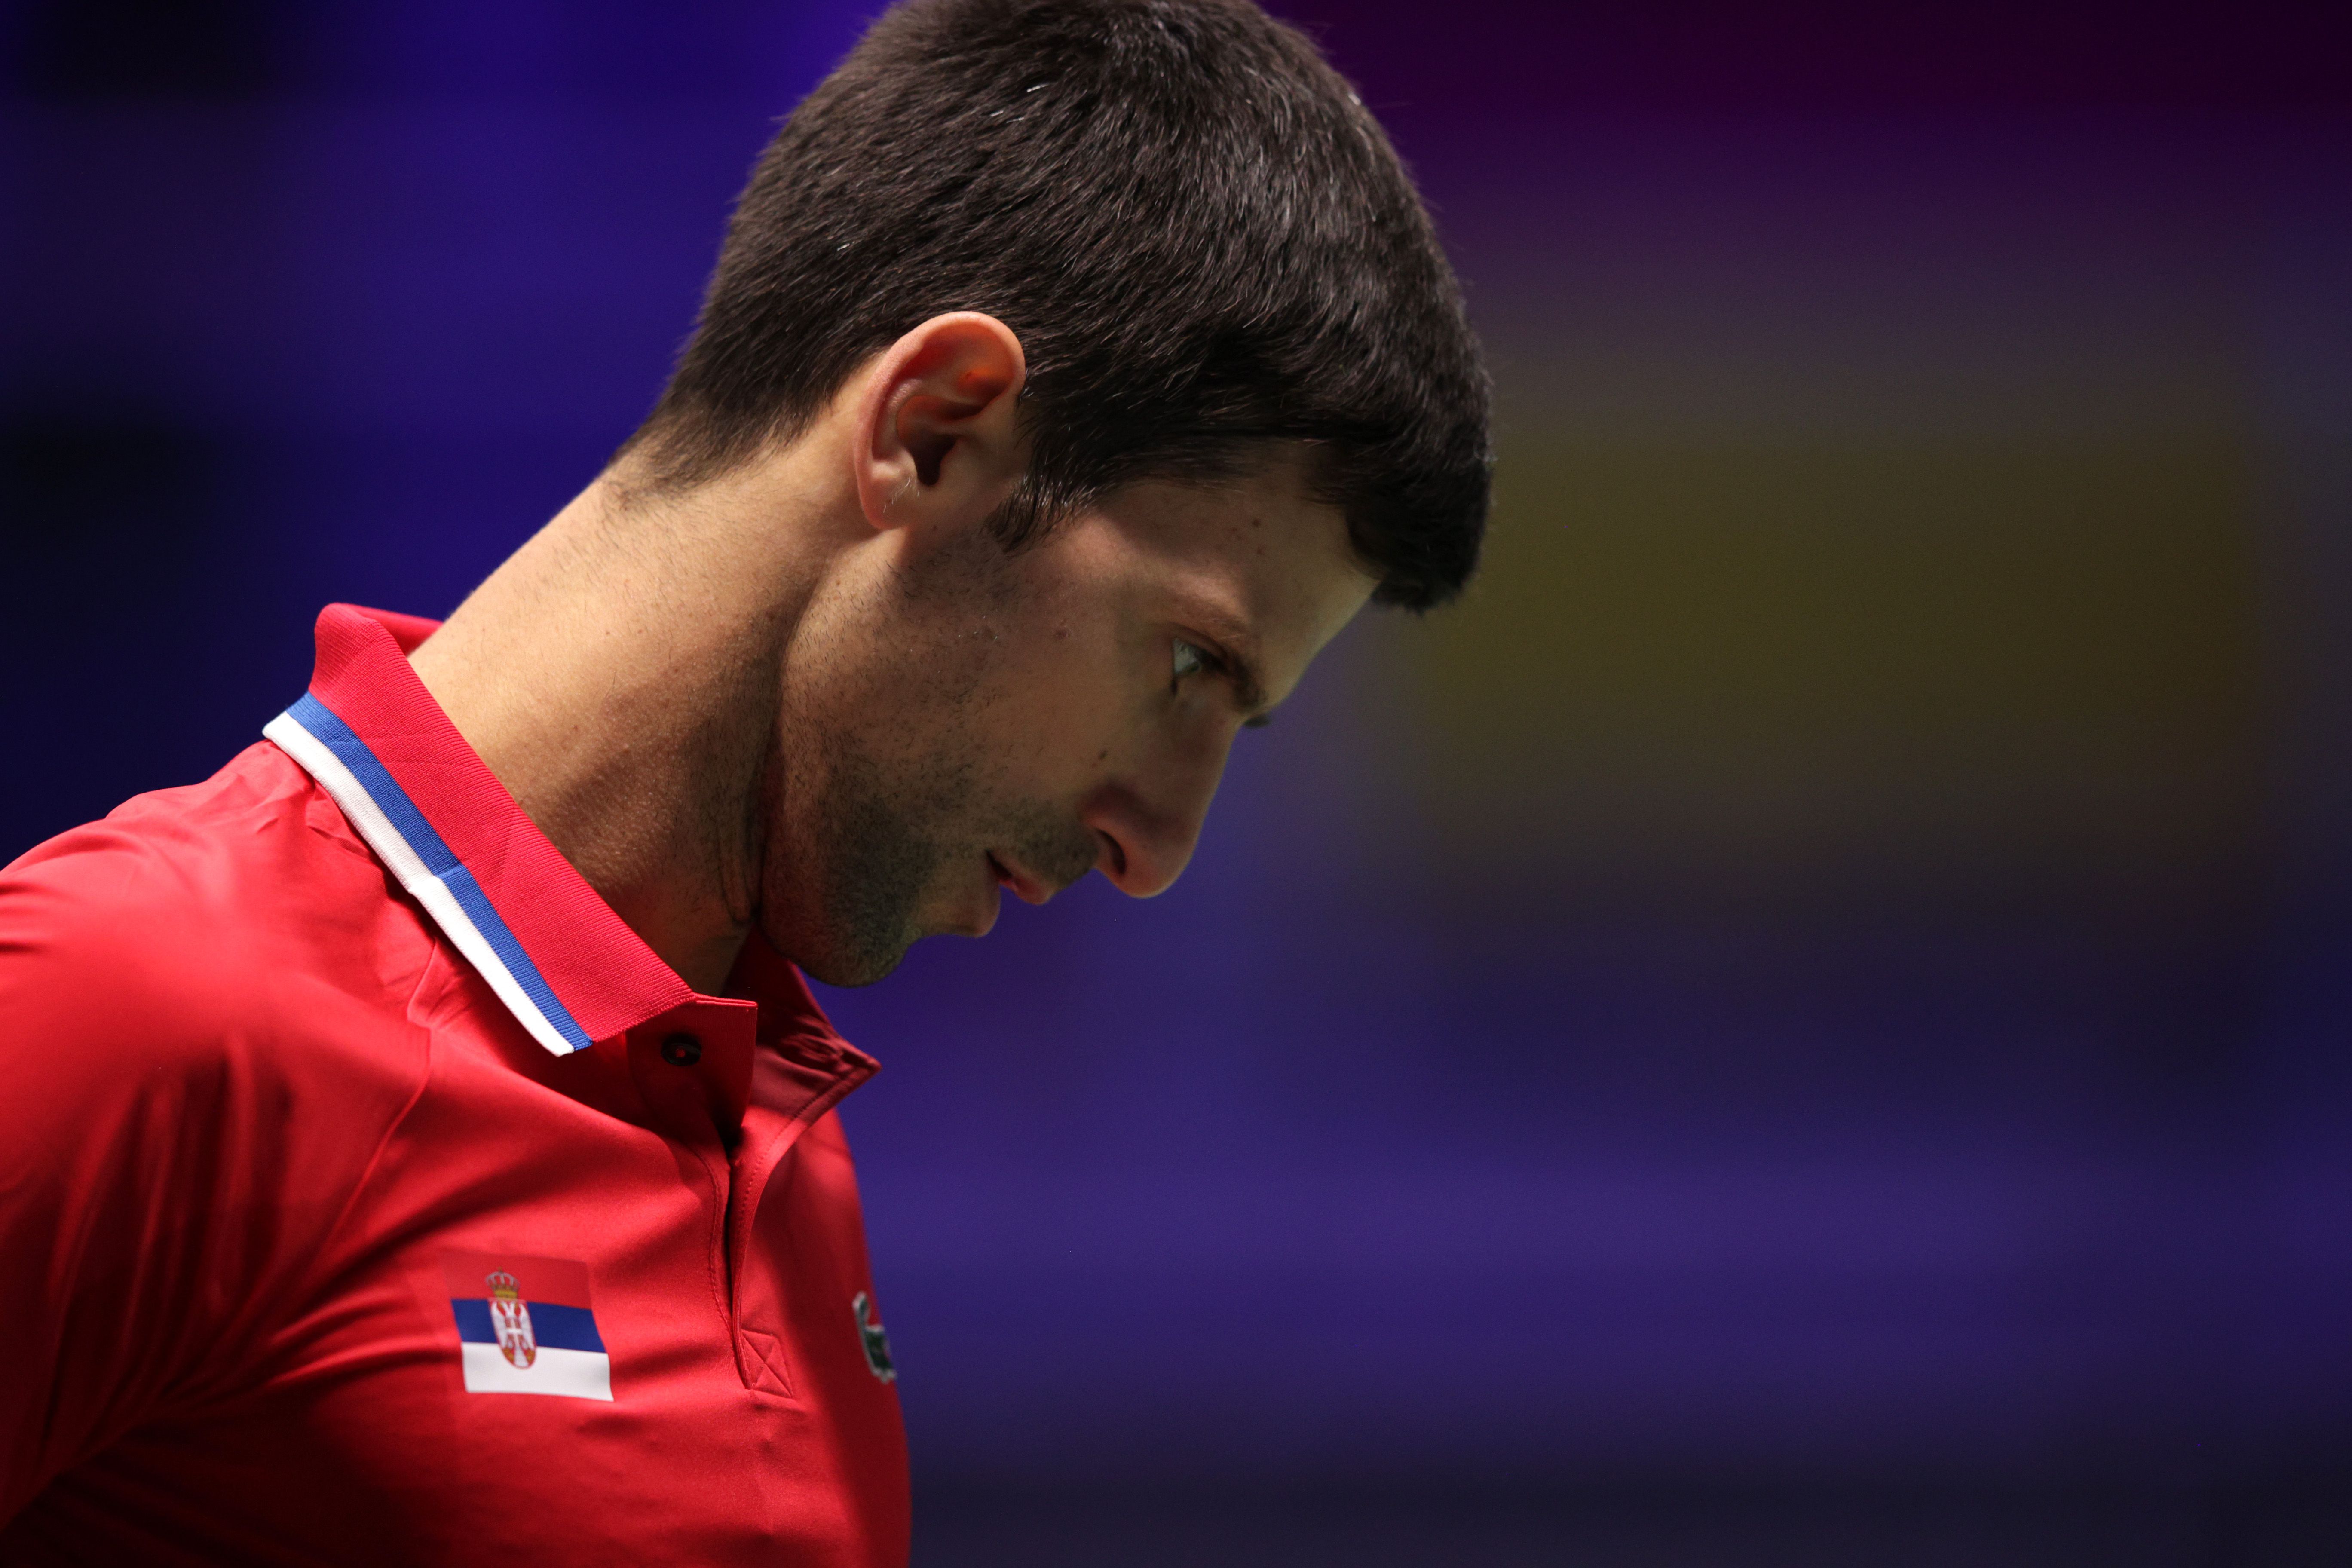 An investigation has been launched against Djokovic in Spain thumbnail